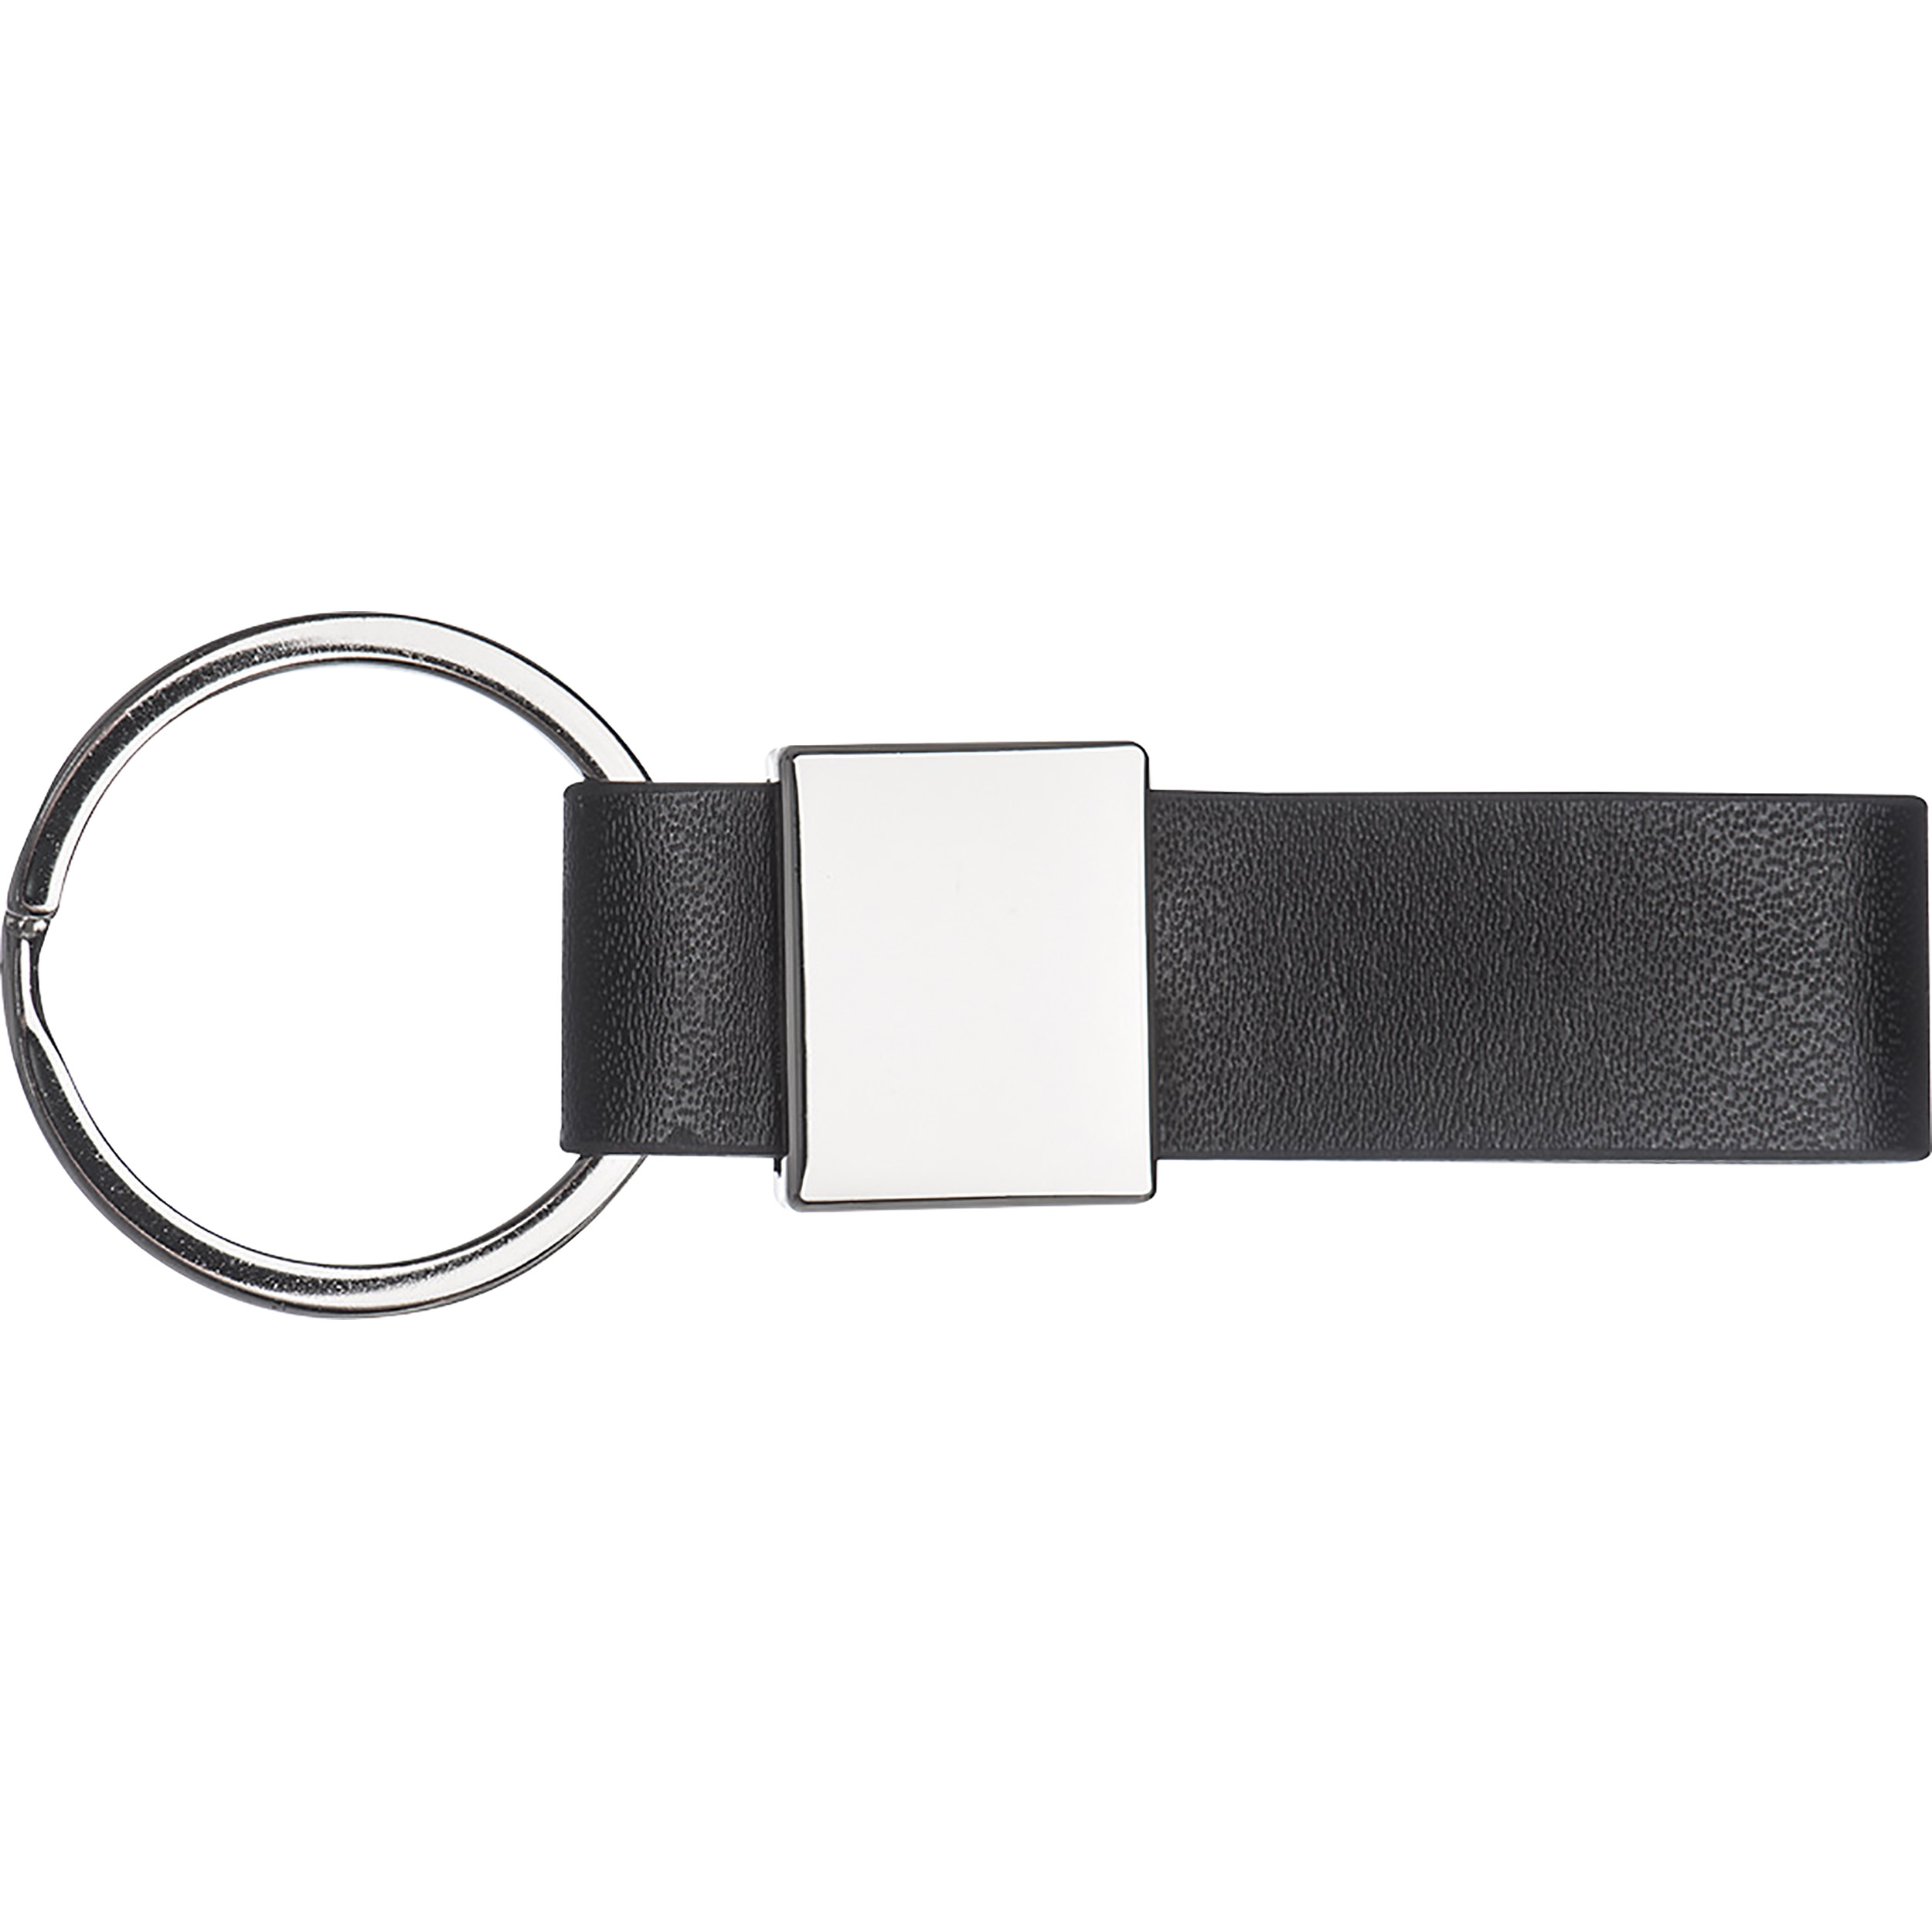 Keyring with a black PU strap